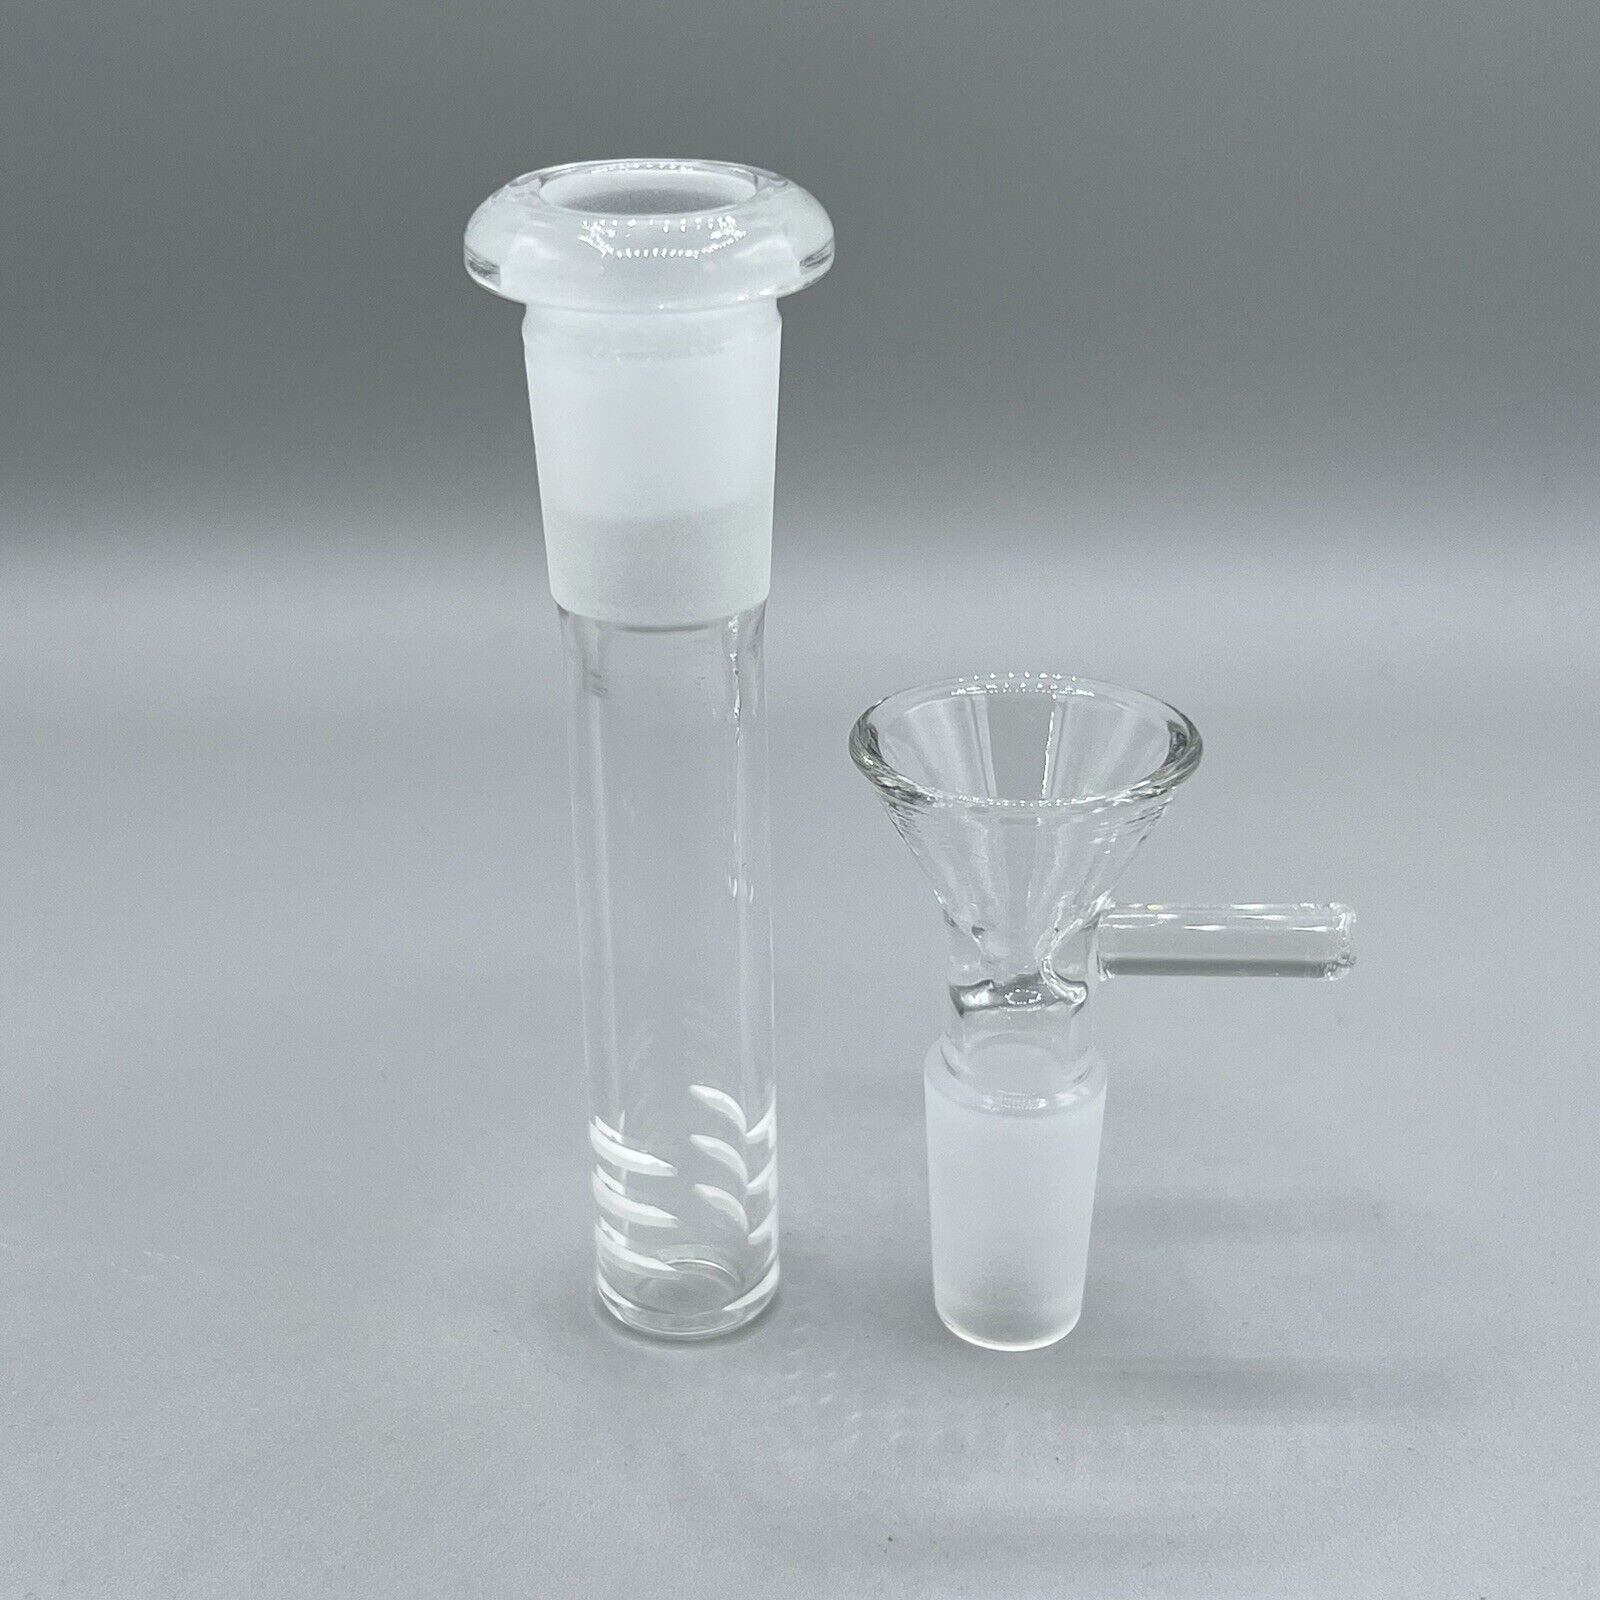 2.5 Downstem Tobacco 18MM to 14MM Glass Water Pipe + 14mm HOOKAH Bong Bowl. Available Now for 14.39